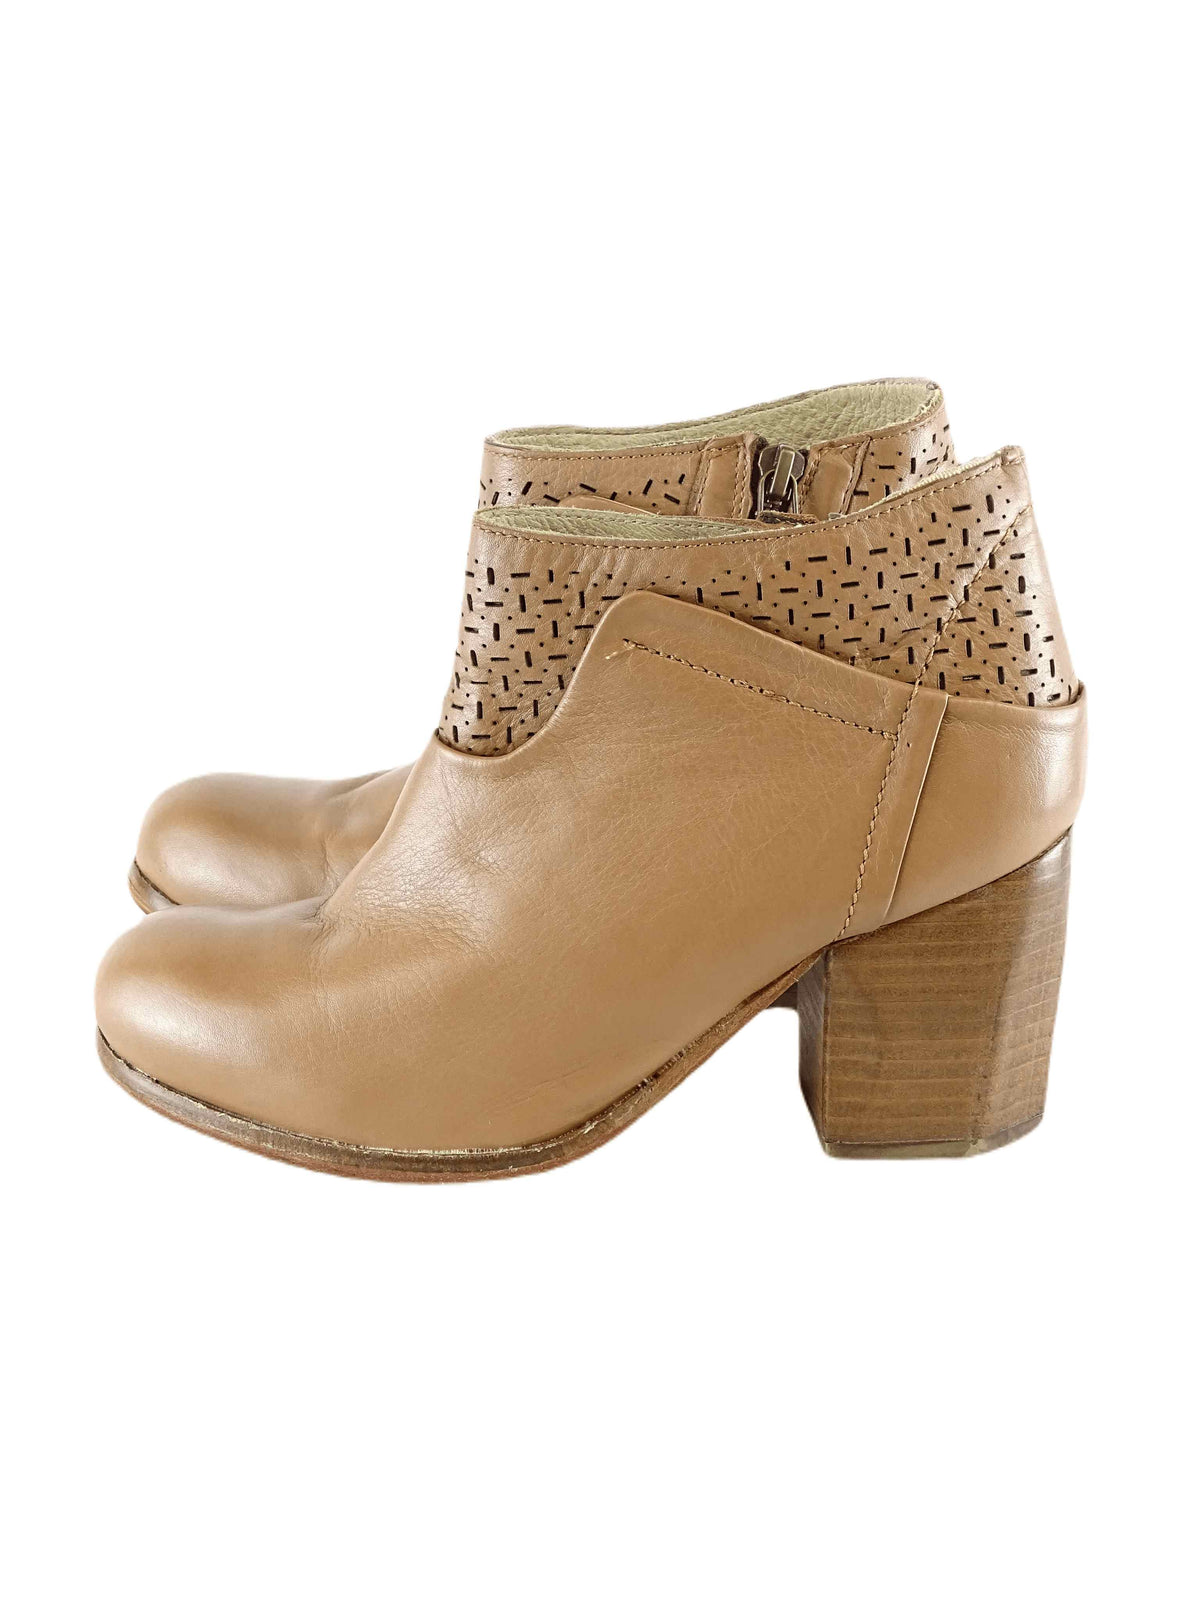 RMK Brown Leather Ankle Boots 37